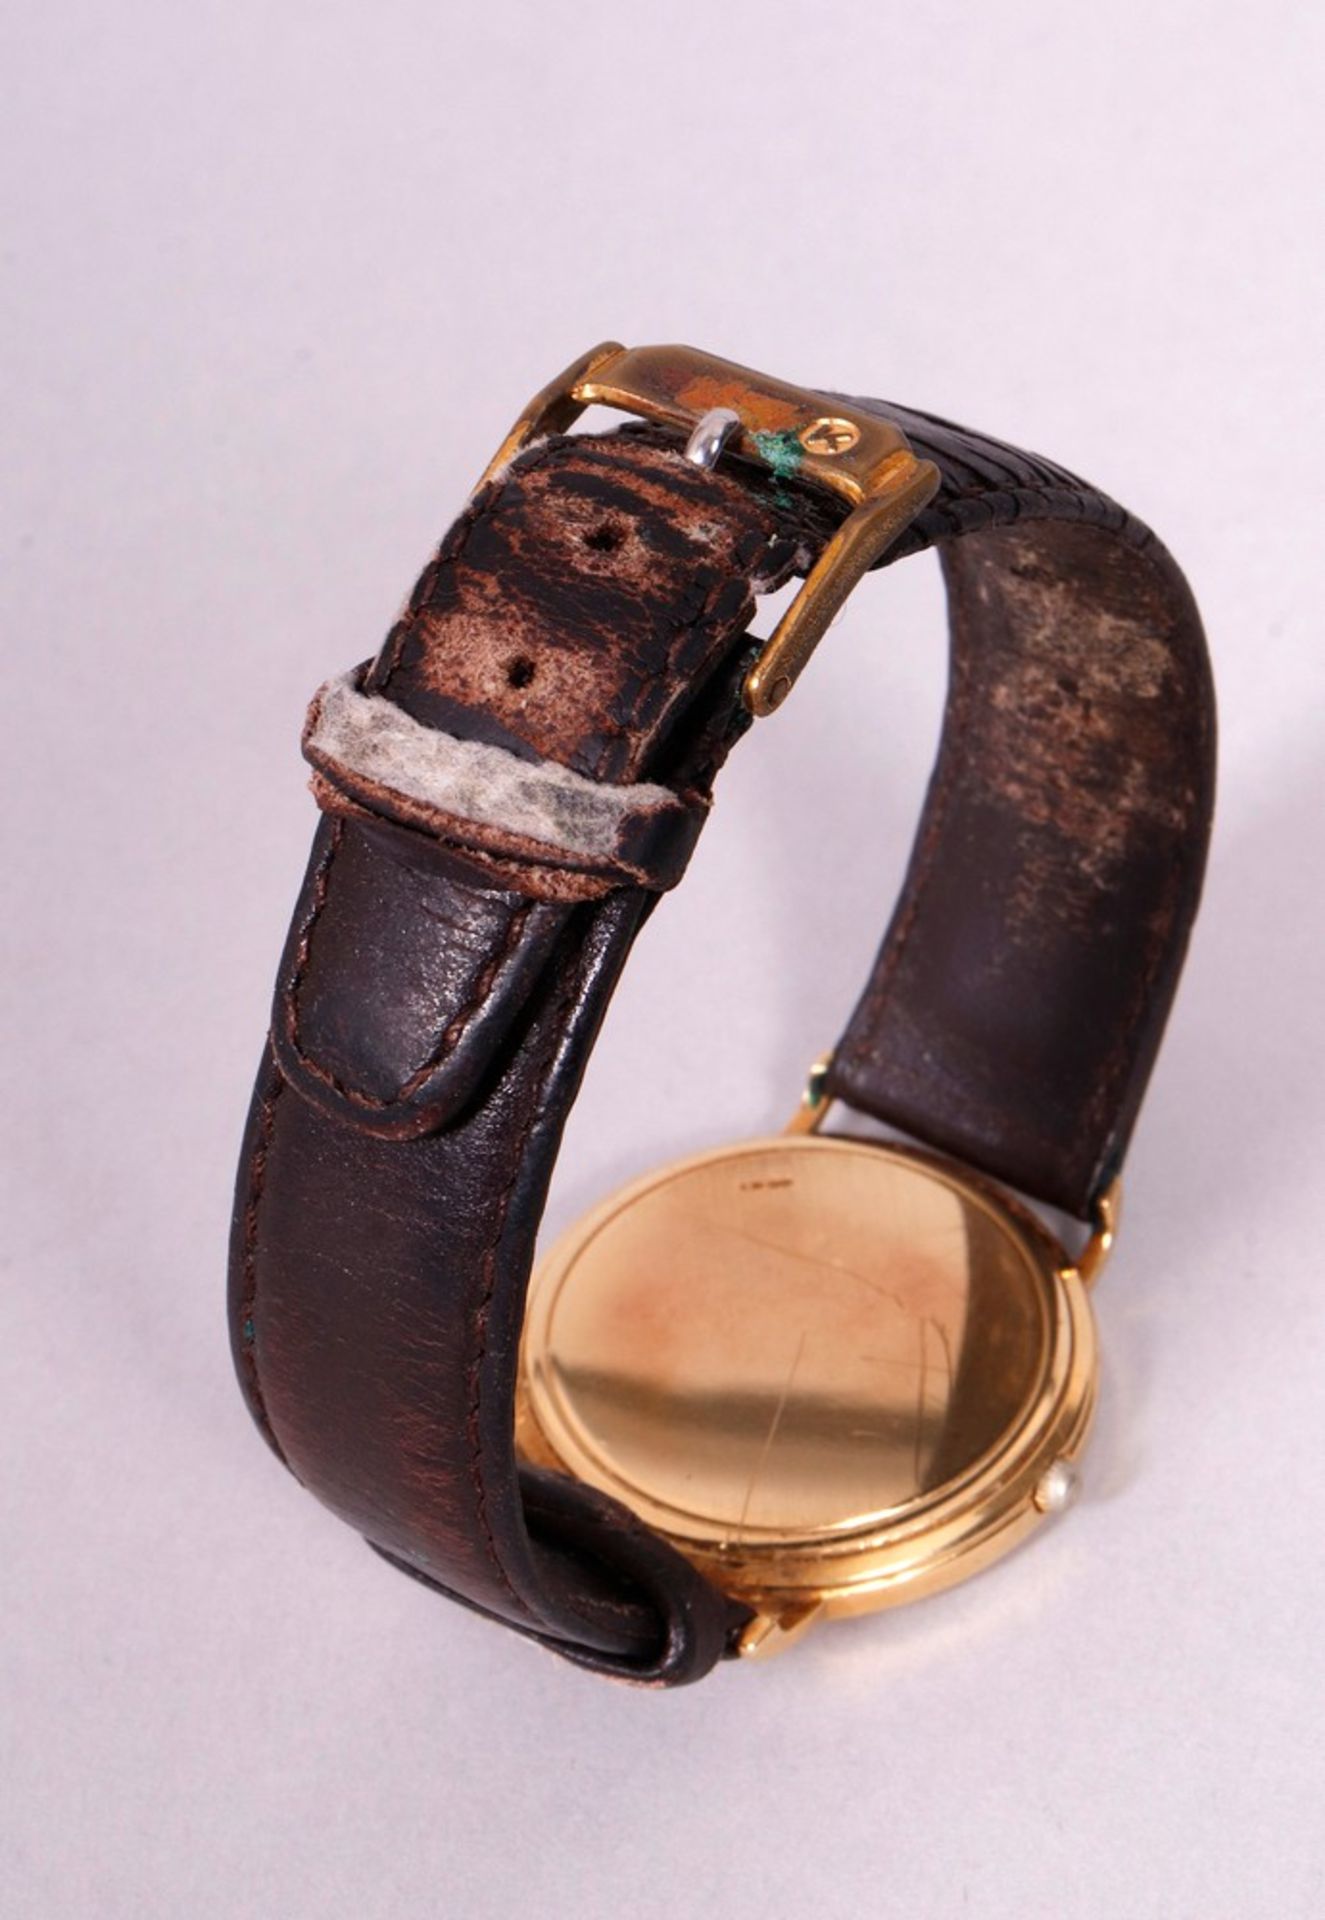 Gent's wristwatch, 750 gold, Omega Classic Date - Image 3 of 3